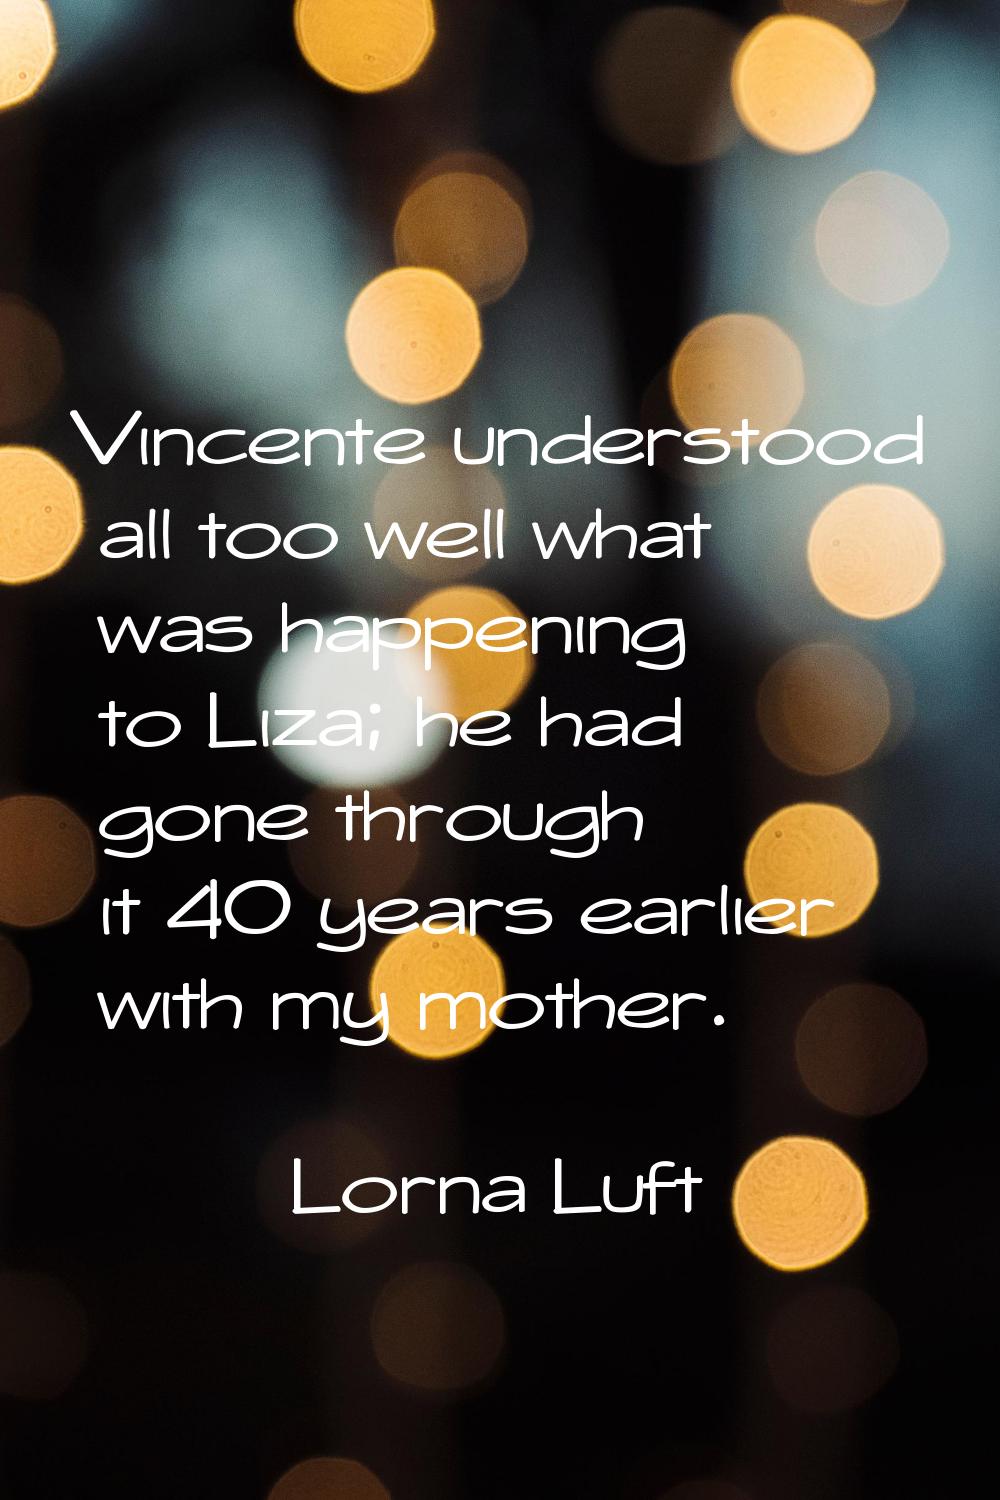 Vincente understood all too well what was happening to Liza; he had gone through it 40 years earlie